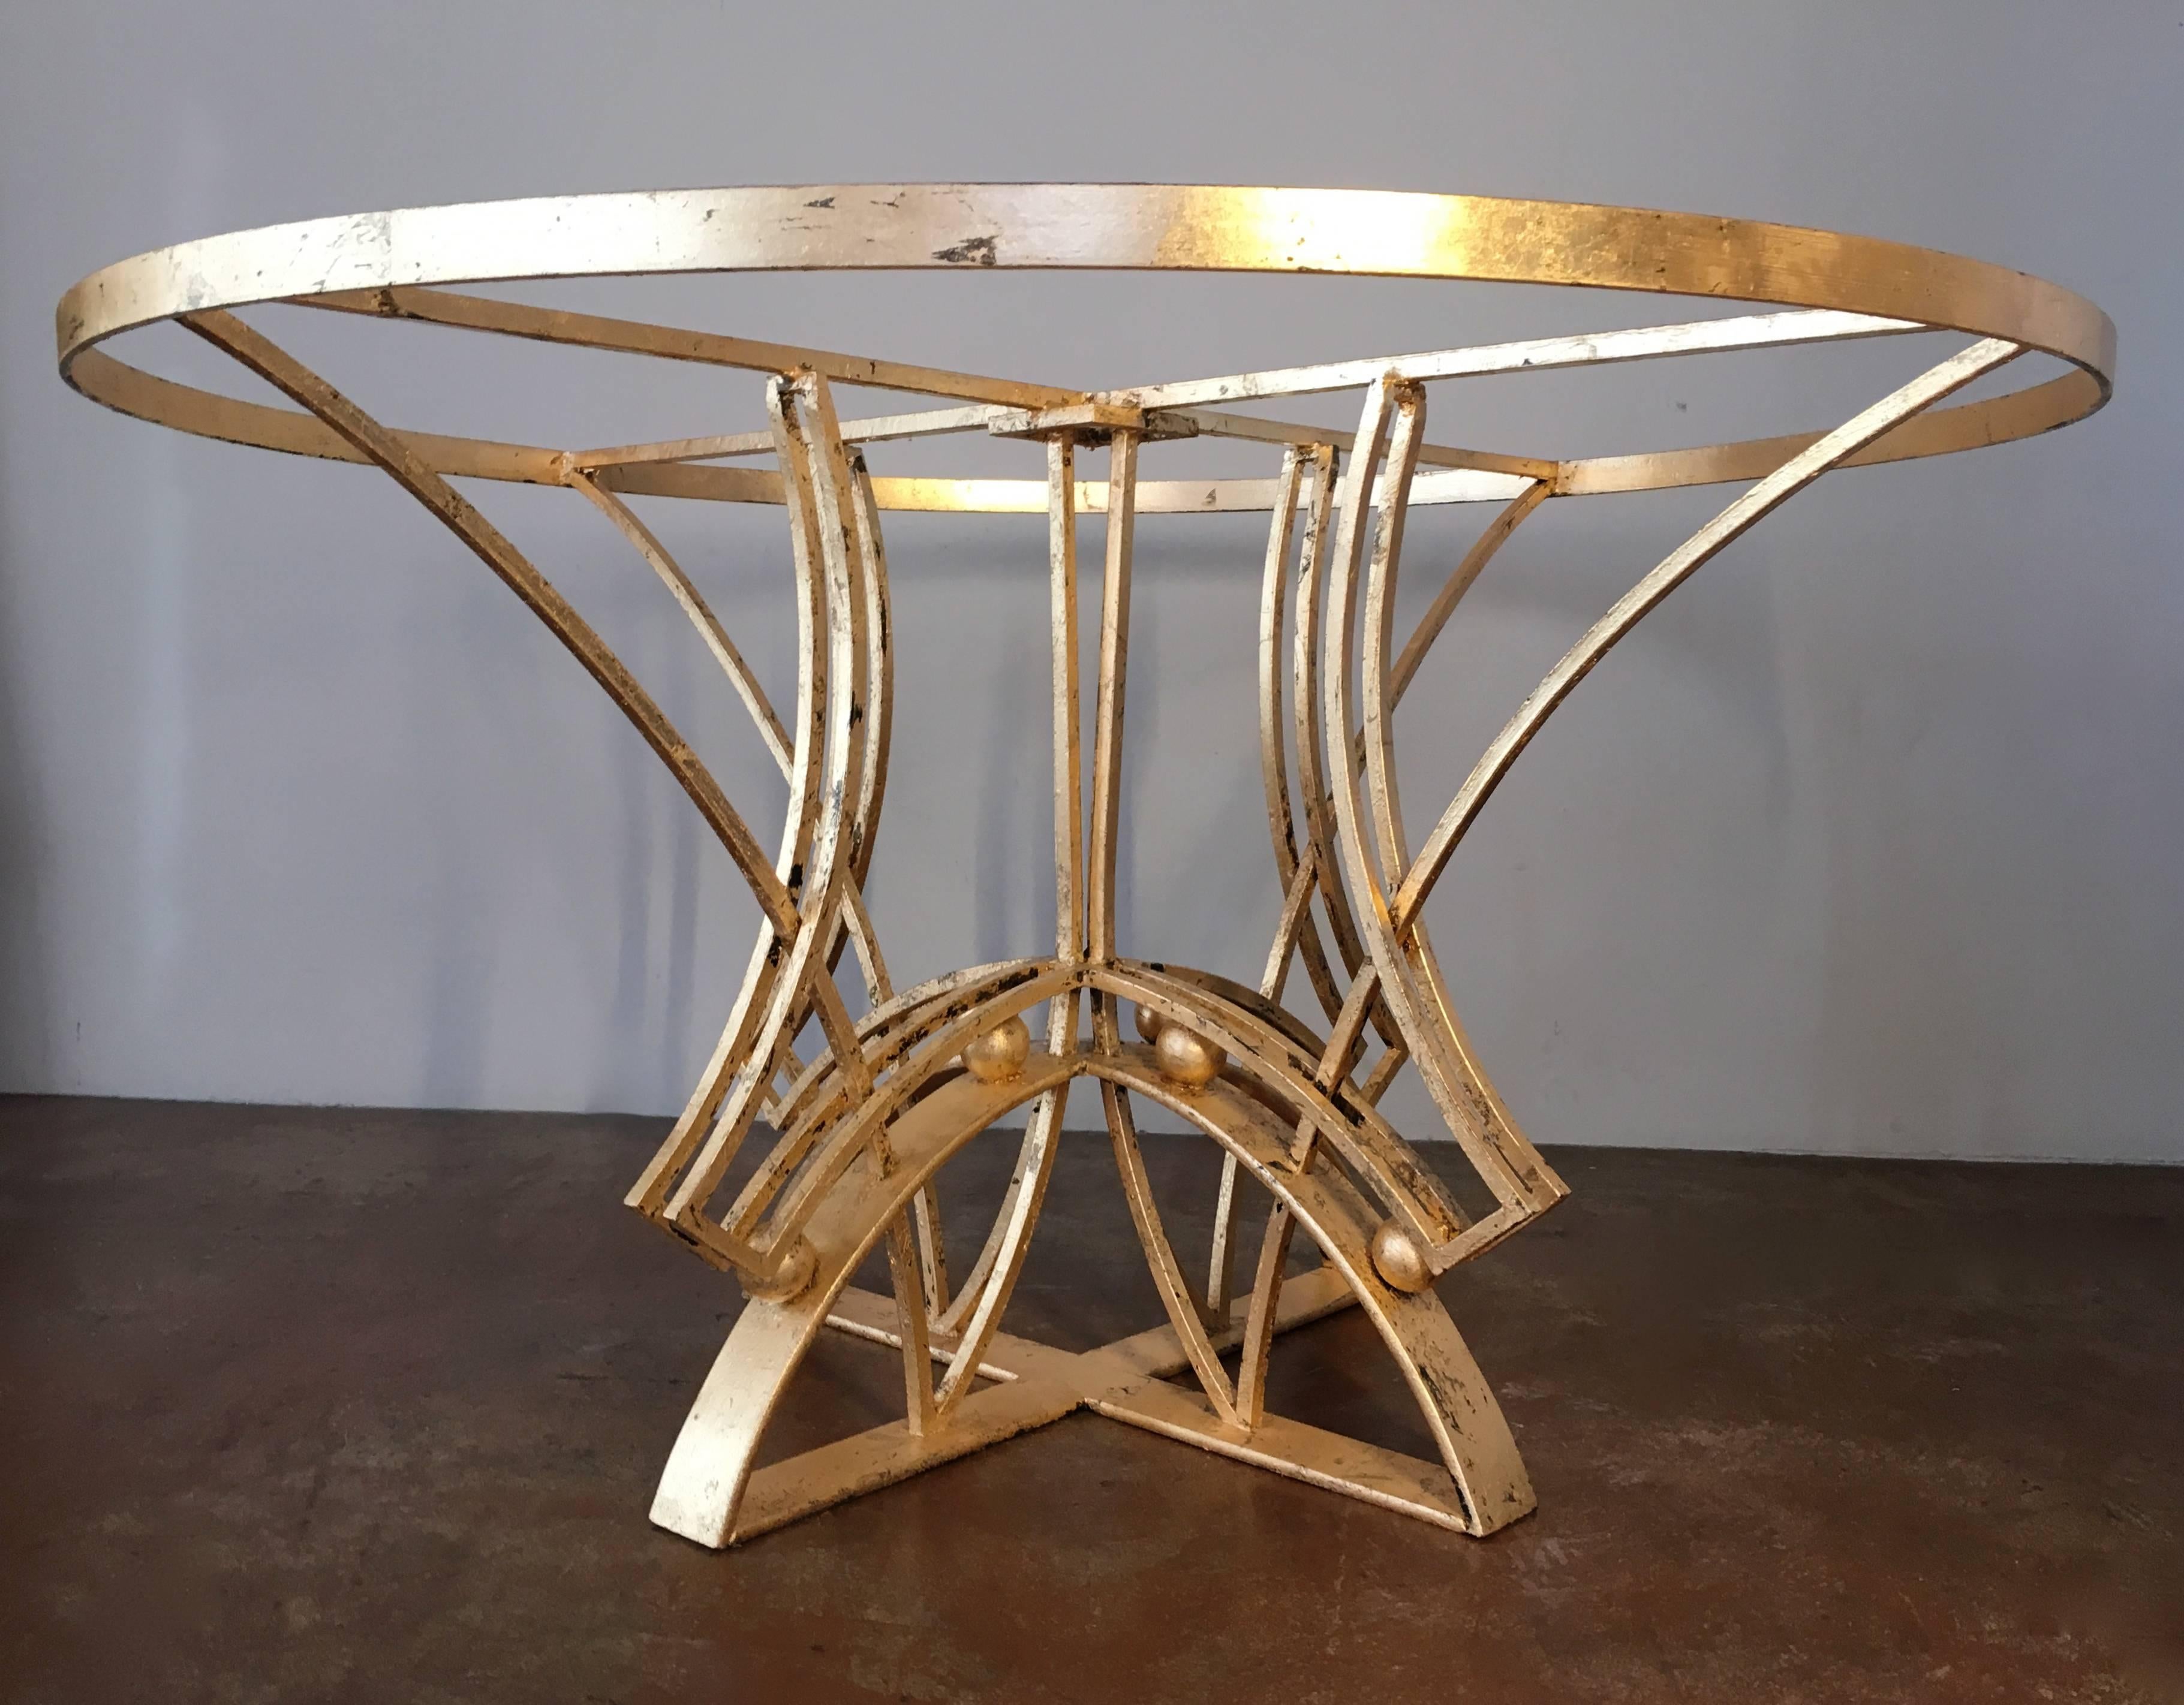 Wrought Iron Stunning Arturo Pani Gilt Dining Table Base, Mexico City, 1950 For Sale